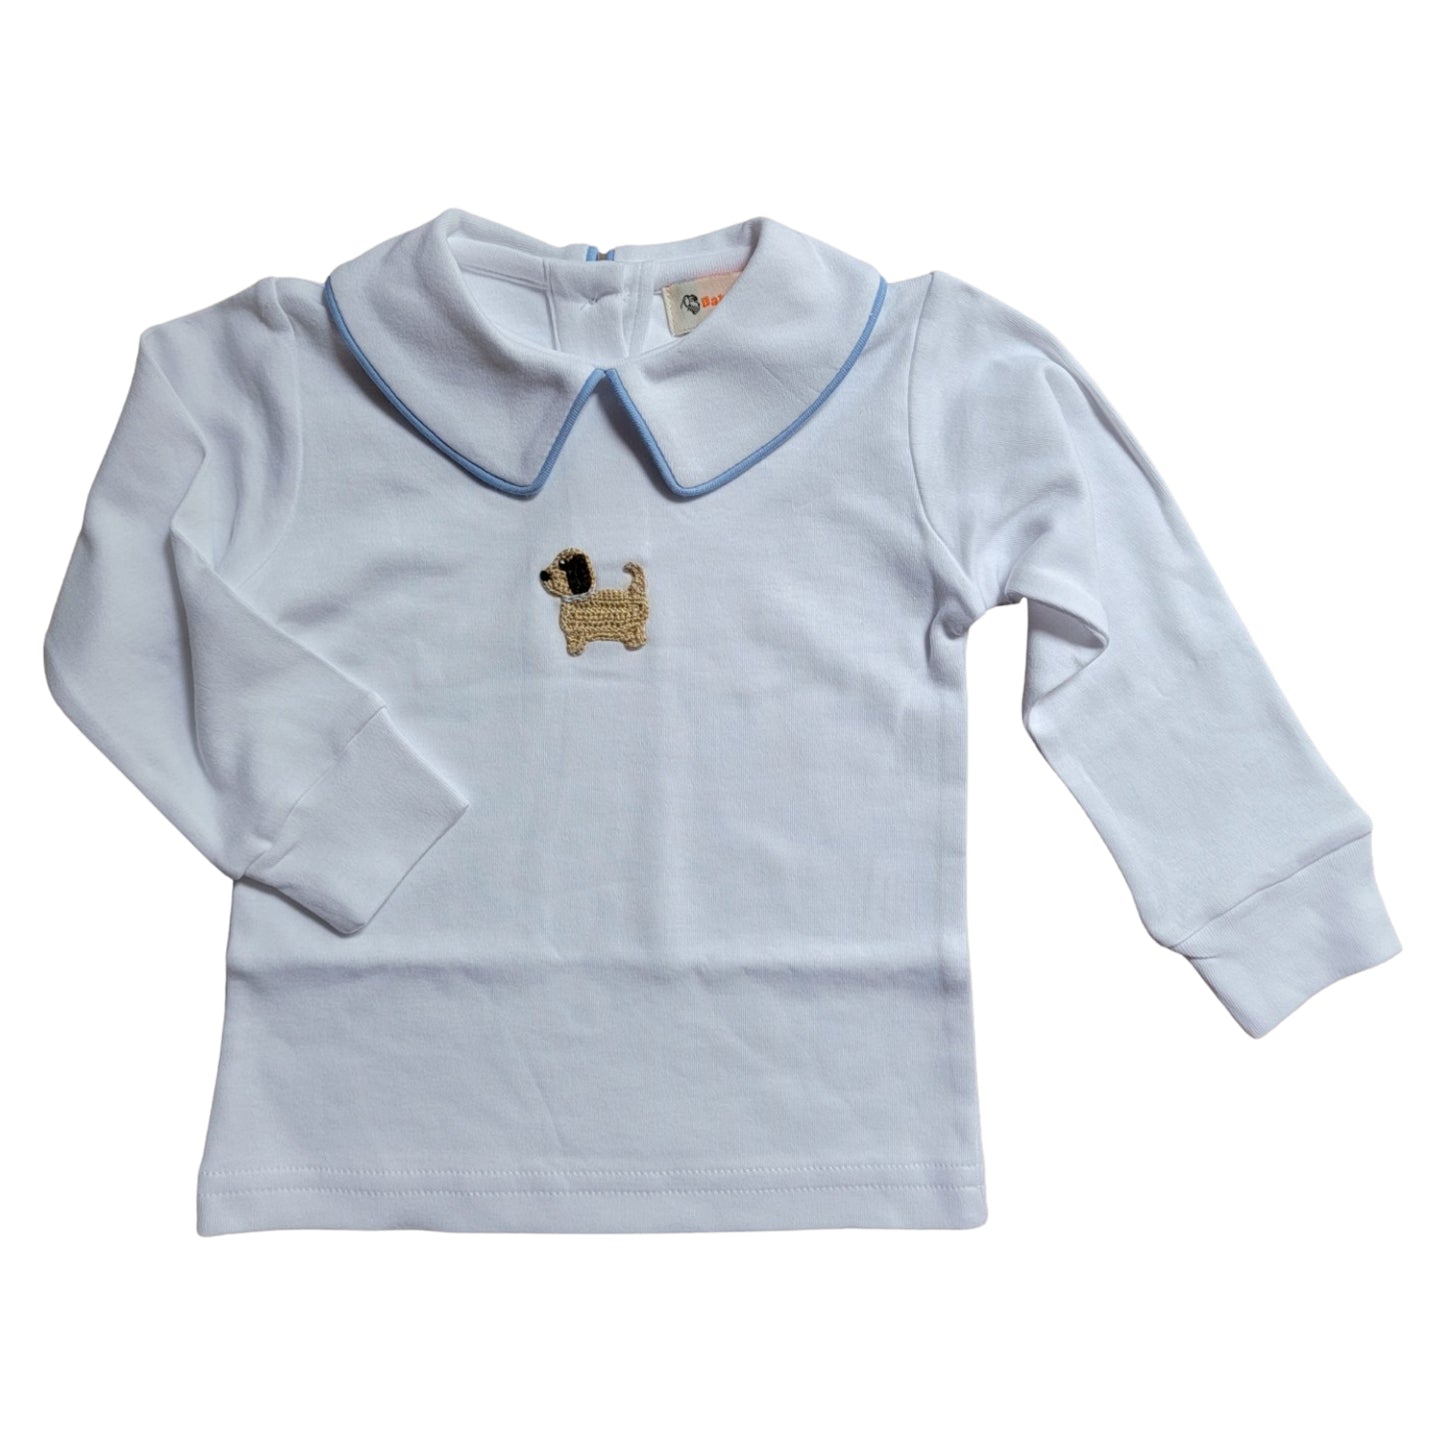 Boy's Long Sleeve Collared Shirt with Crochet Puppy